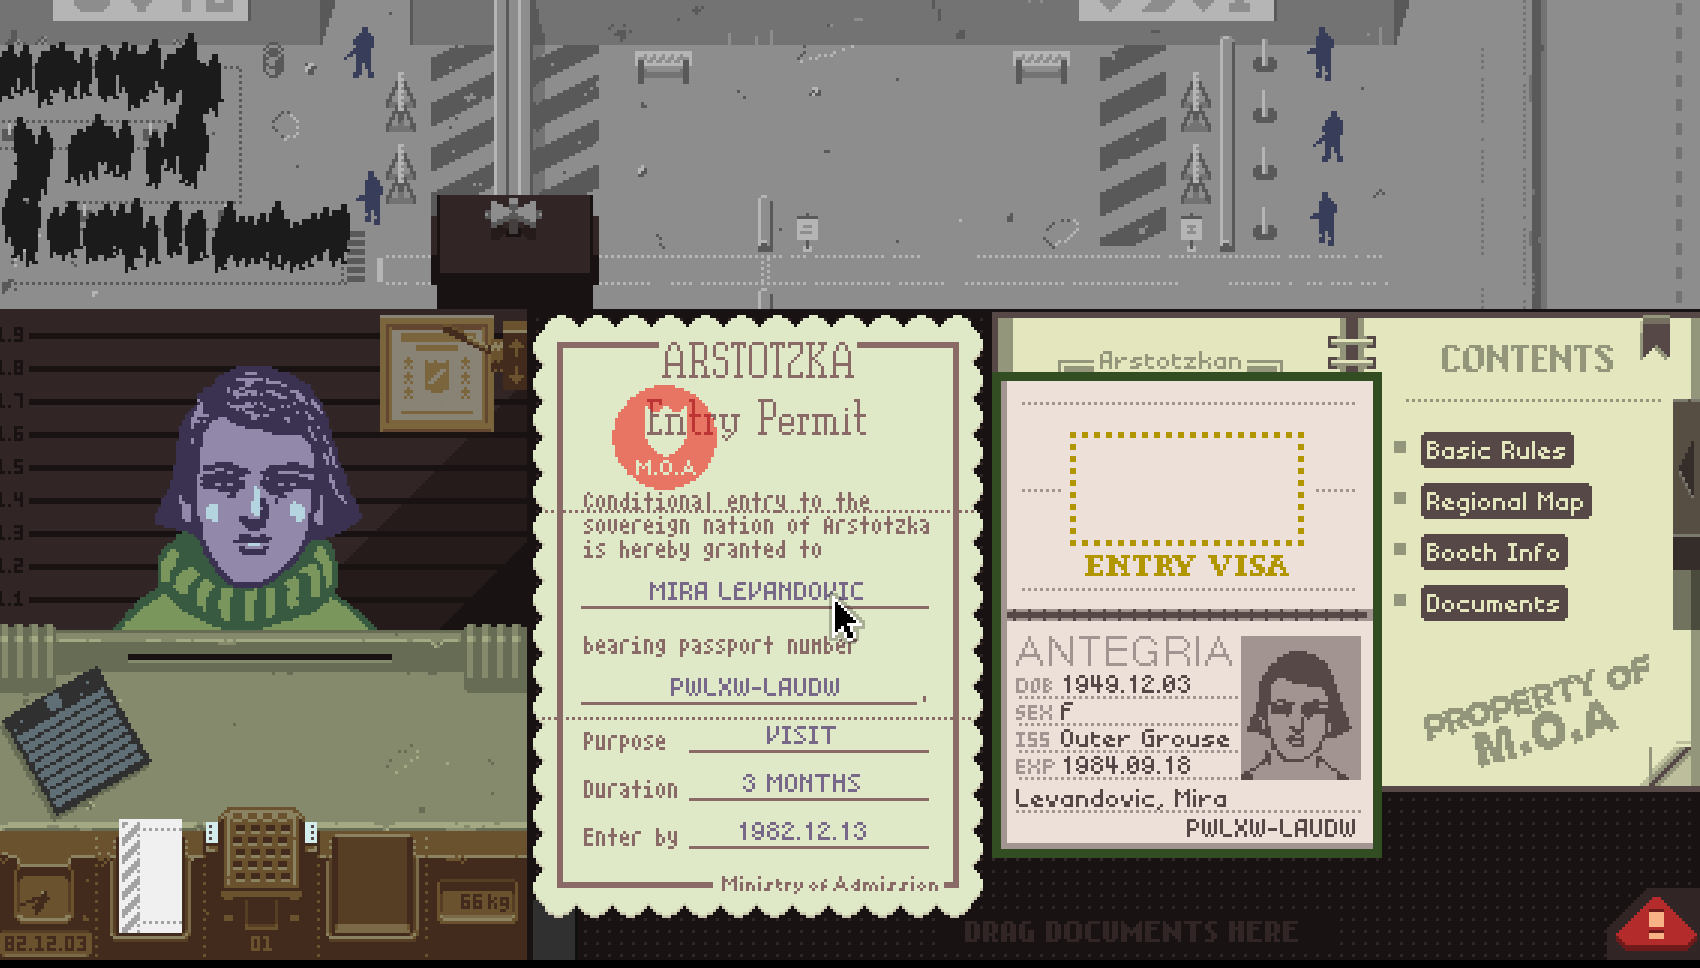 papers please game plau